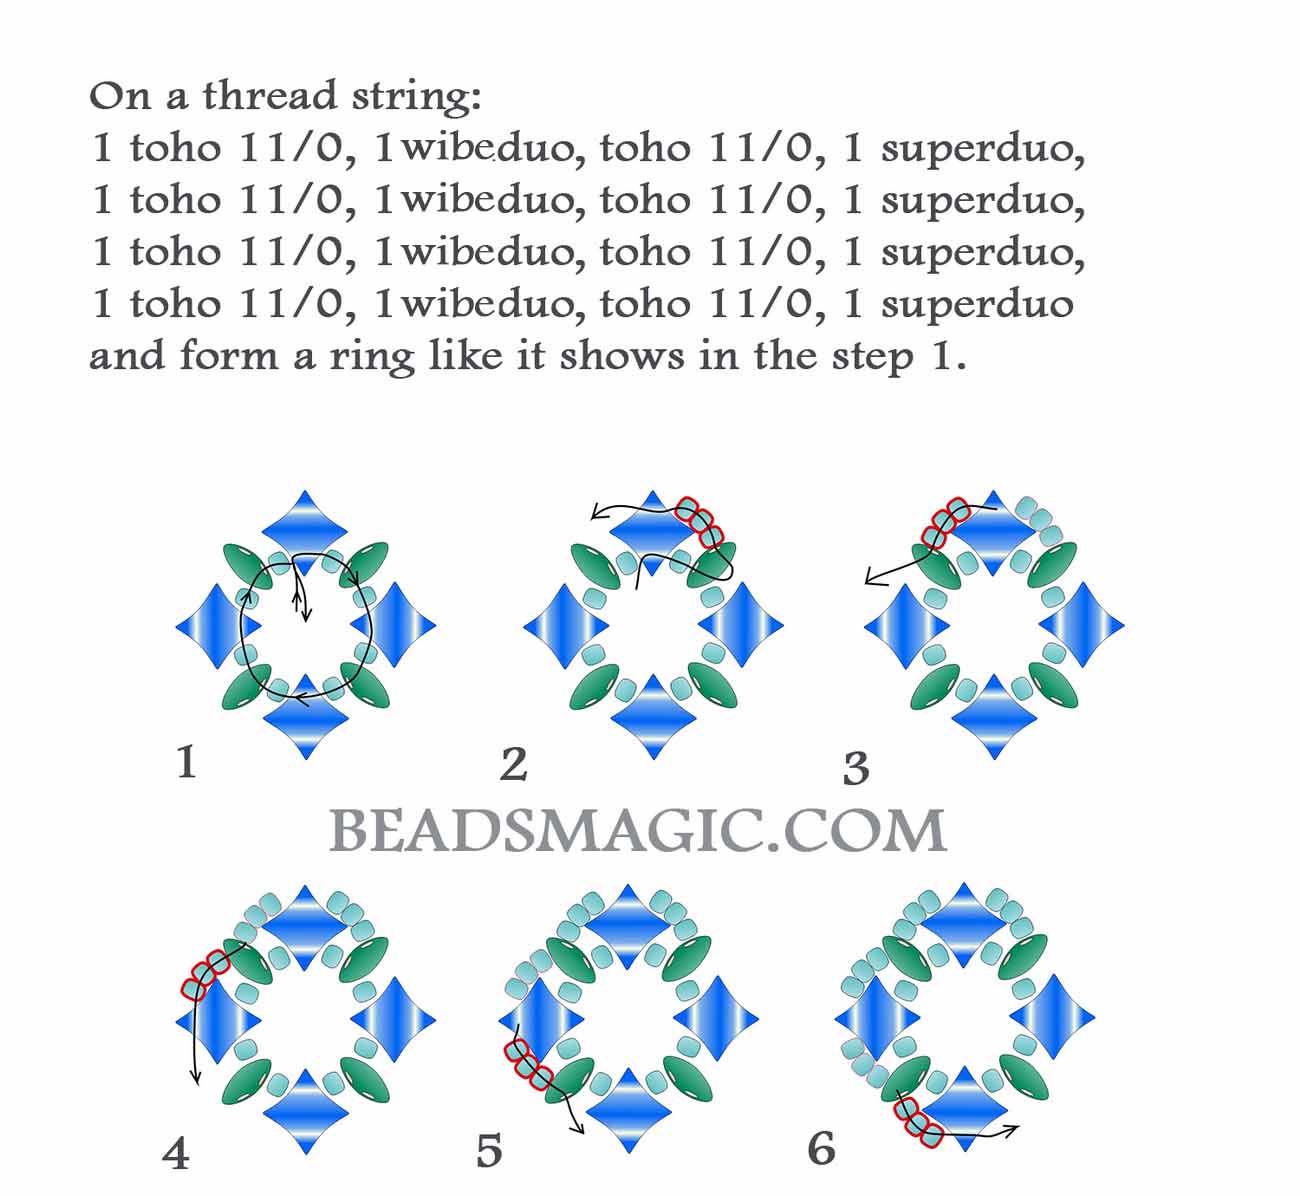 Free beading pattern for earrings with wibeduo and superduo, beadsmagic